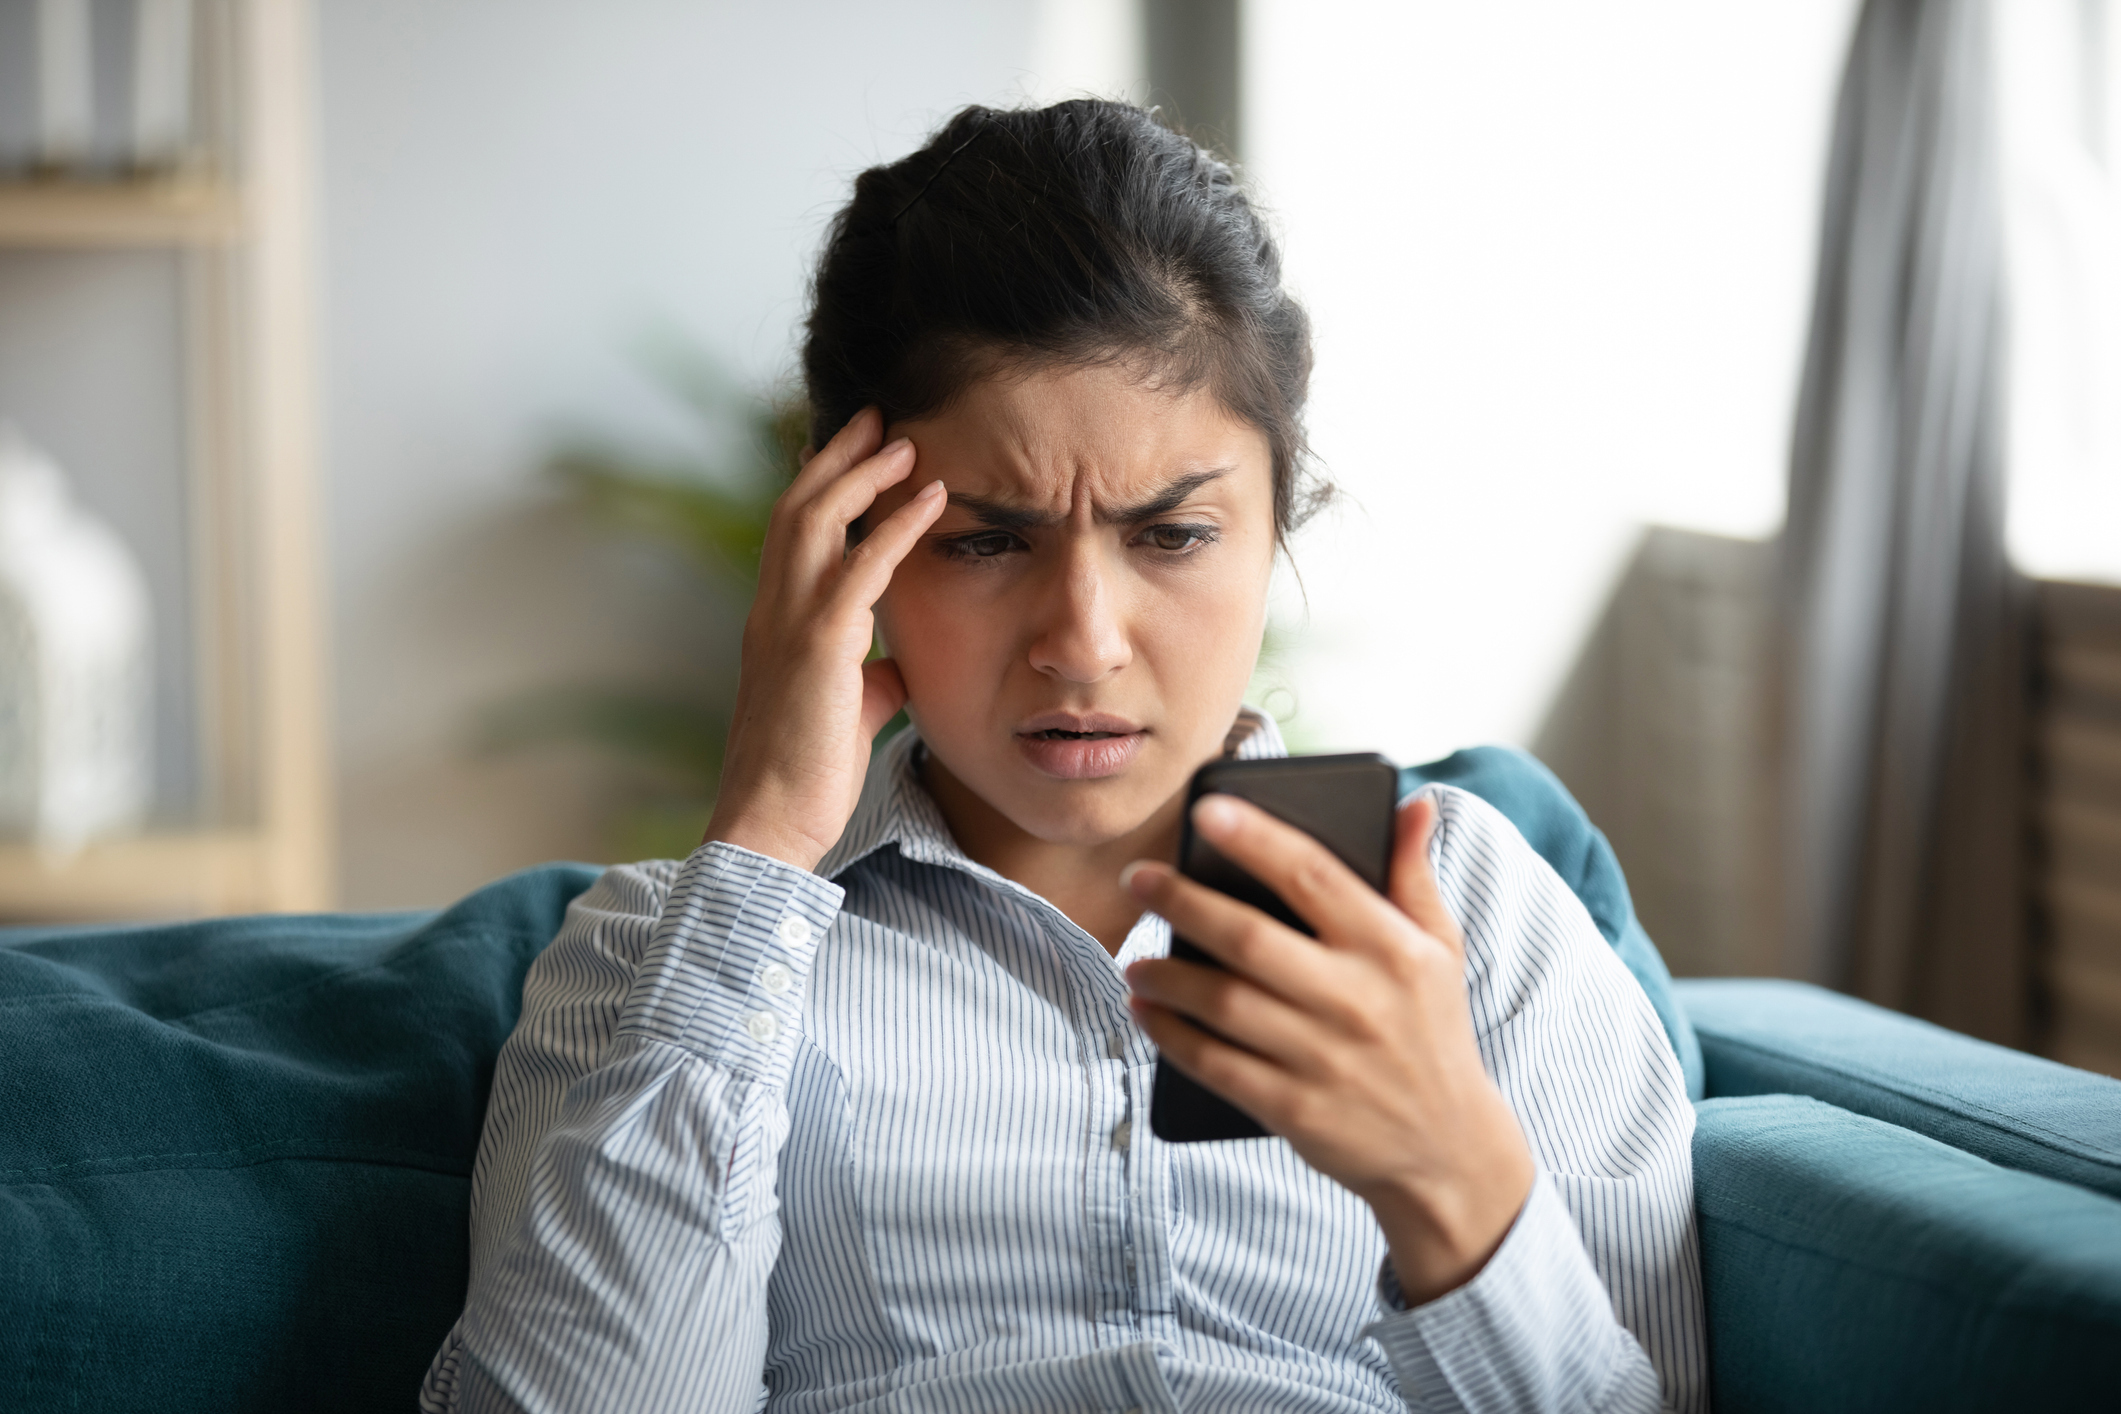 Concerned woman looking at cell phone as she sits on a couch.